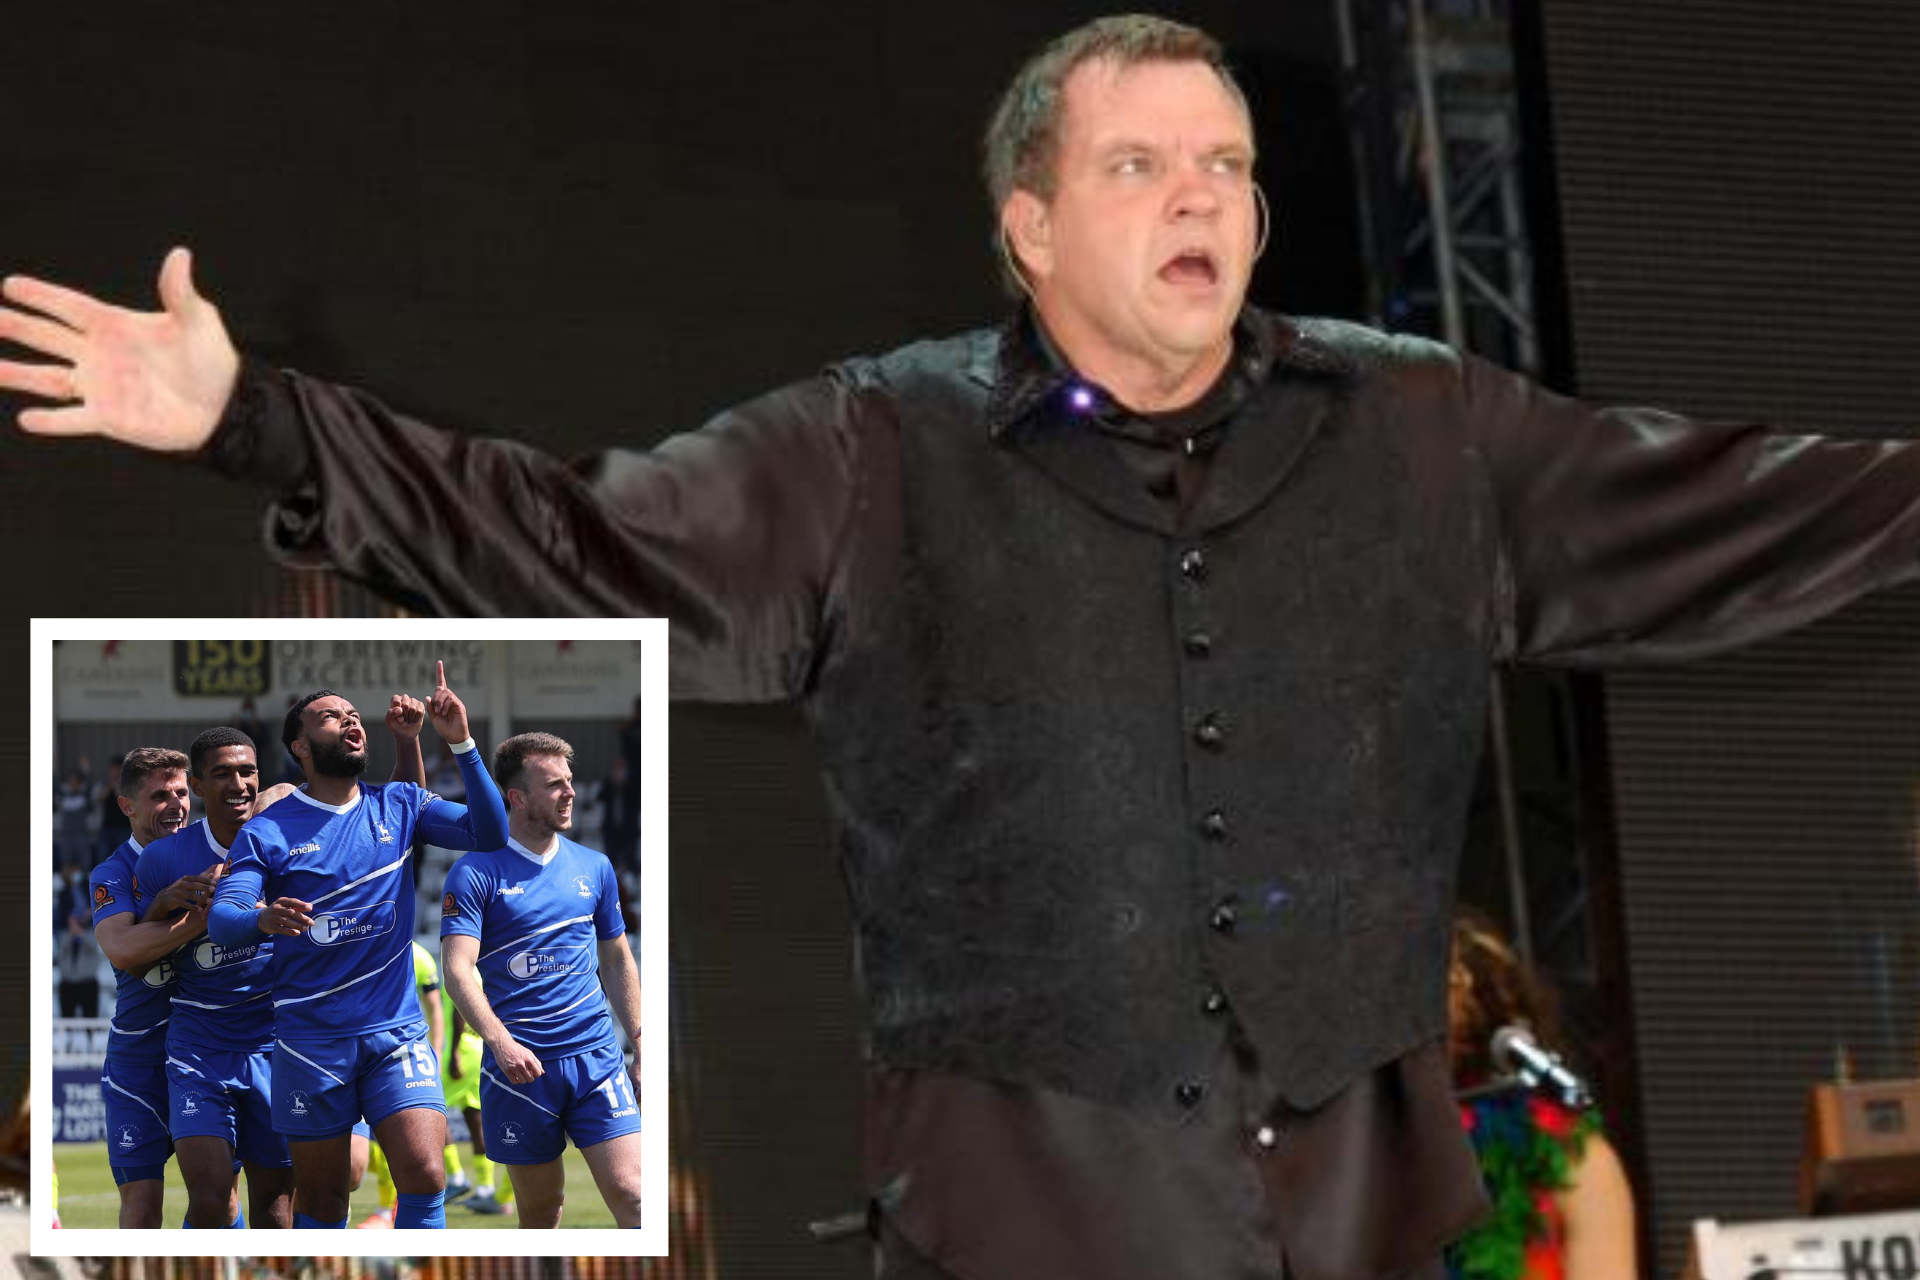 WATCH: Hartlepool FC pay tribute to pop singer Meat Loaf after his death